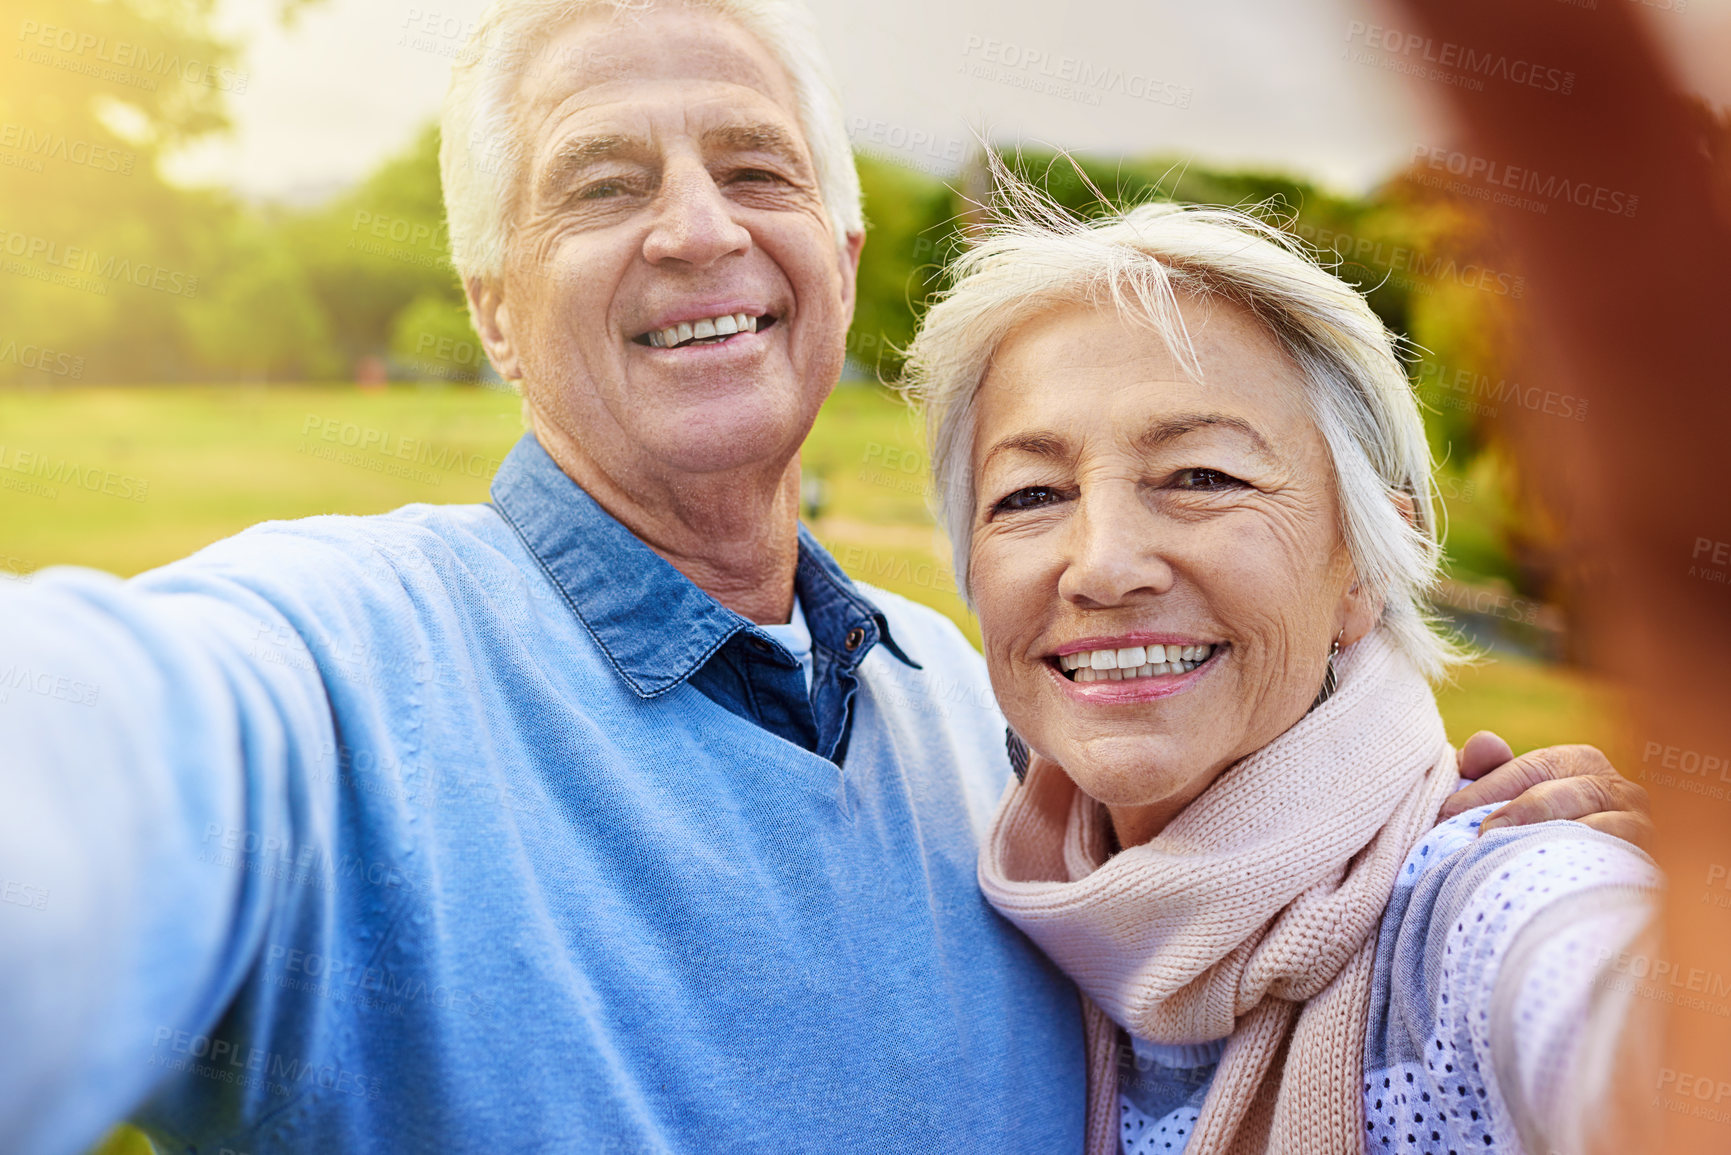 Buy stock photo Portrait of a senior couple taking a photo together in a park